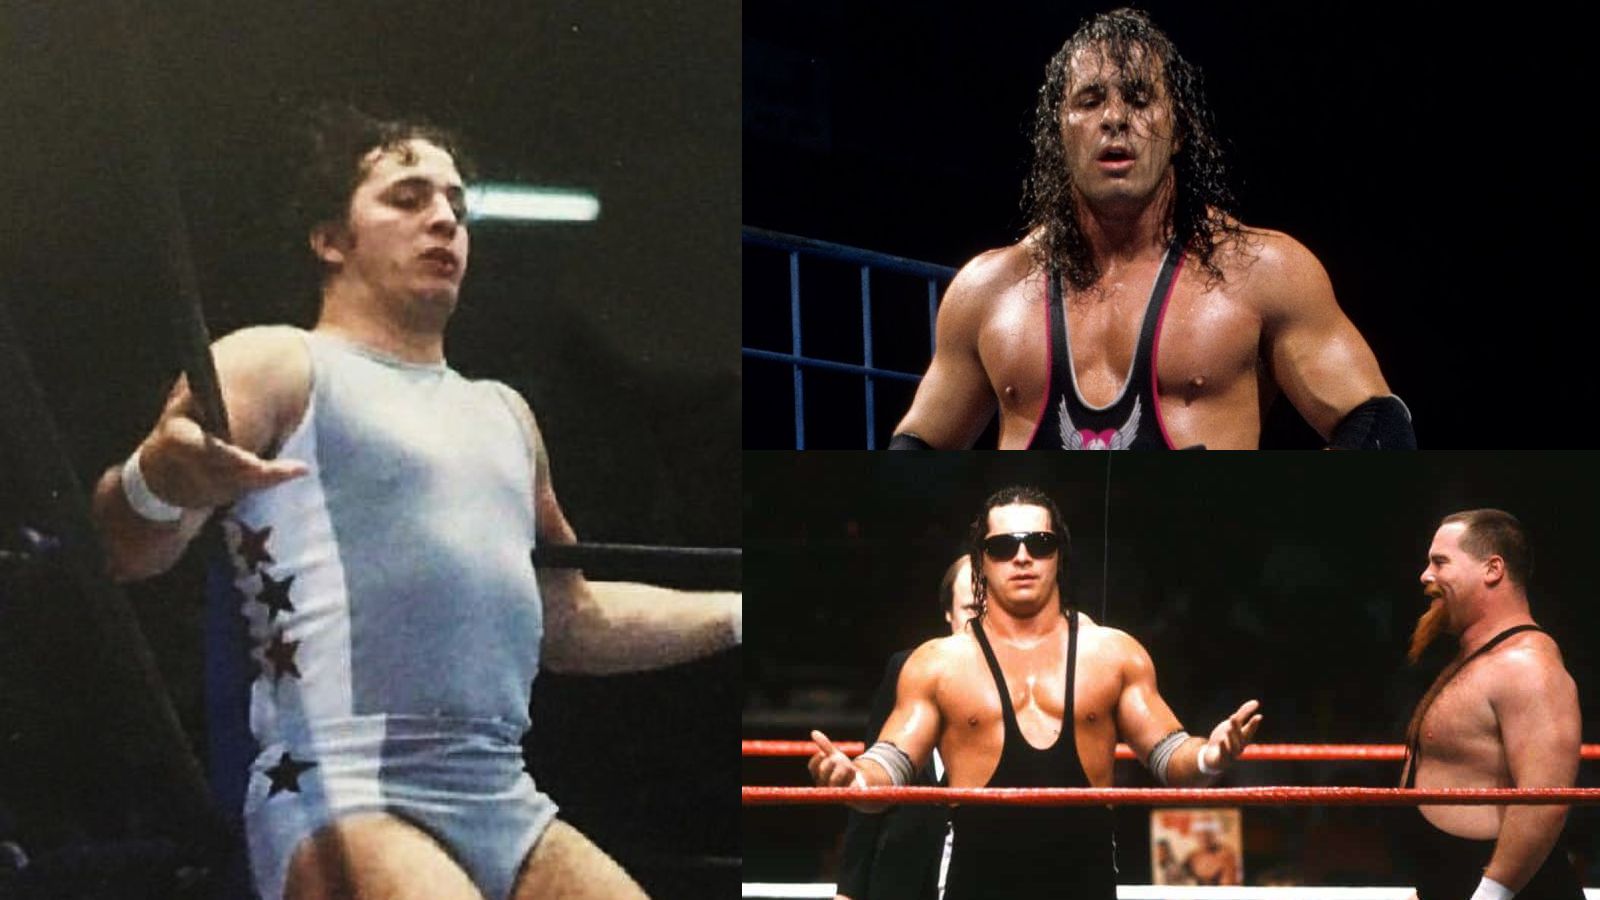 Bret 'the Hitman' Hart: Who is he today and what is his legacy